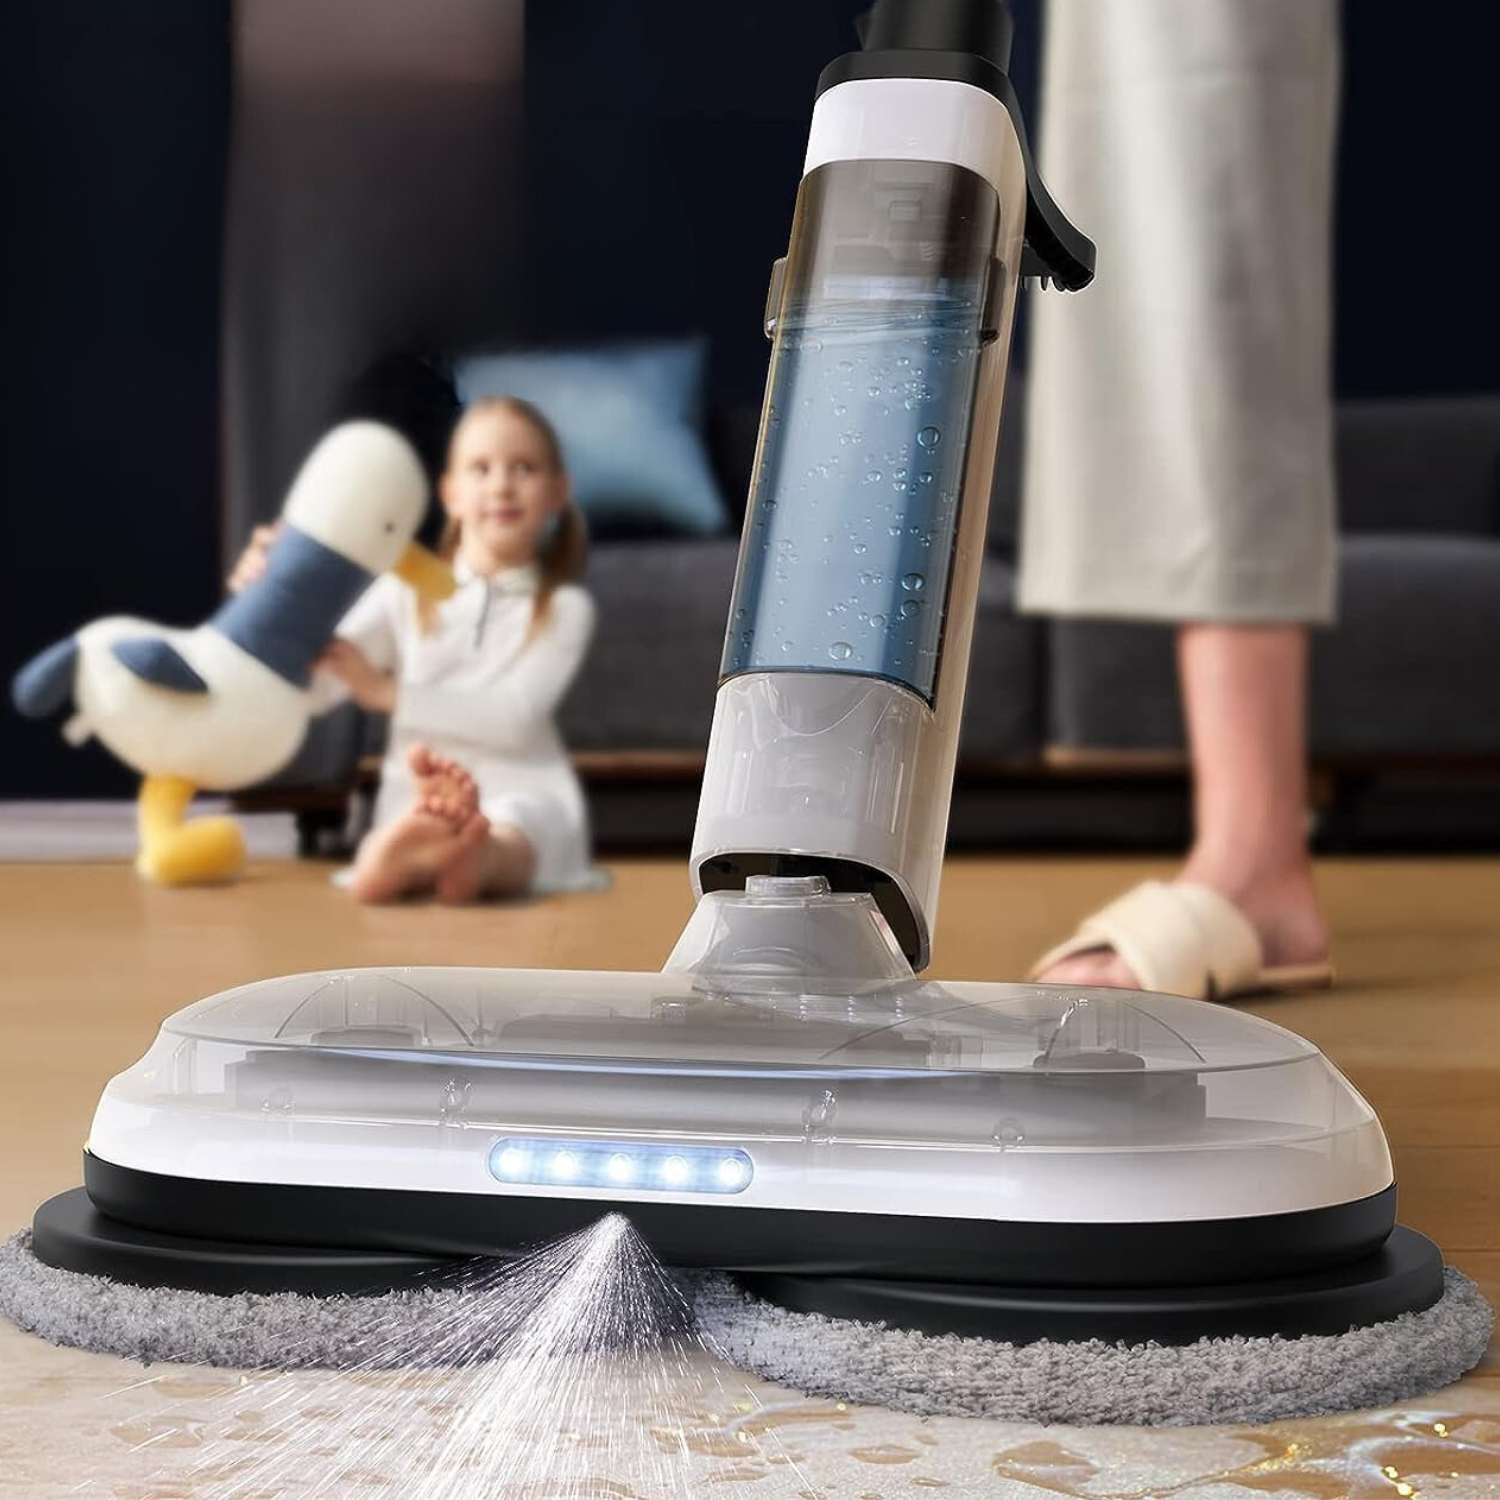 Cordless Electric Mop in Action - Effortless and efficient cleaning for modern homes.